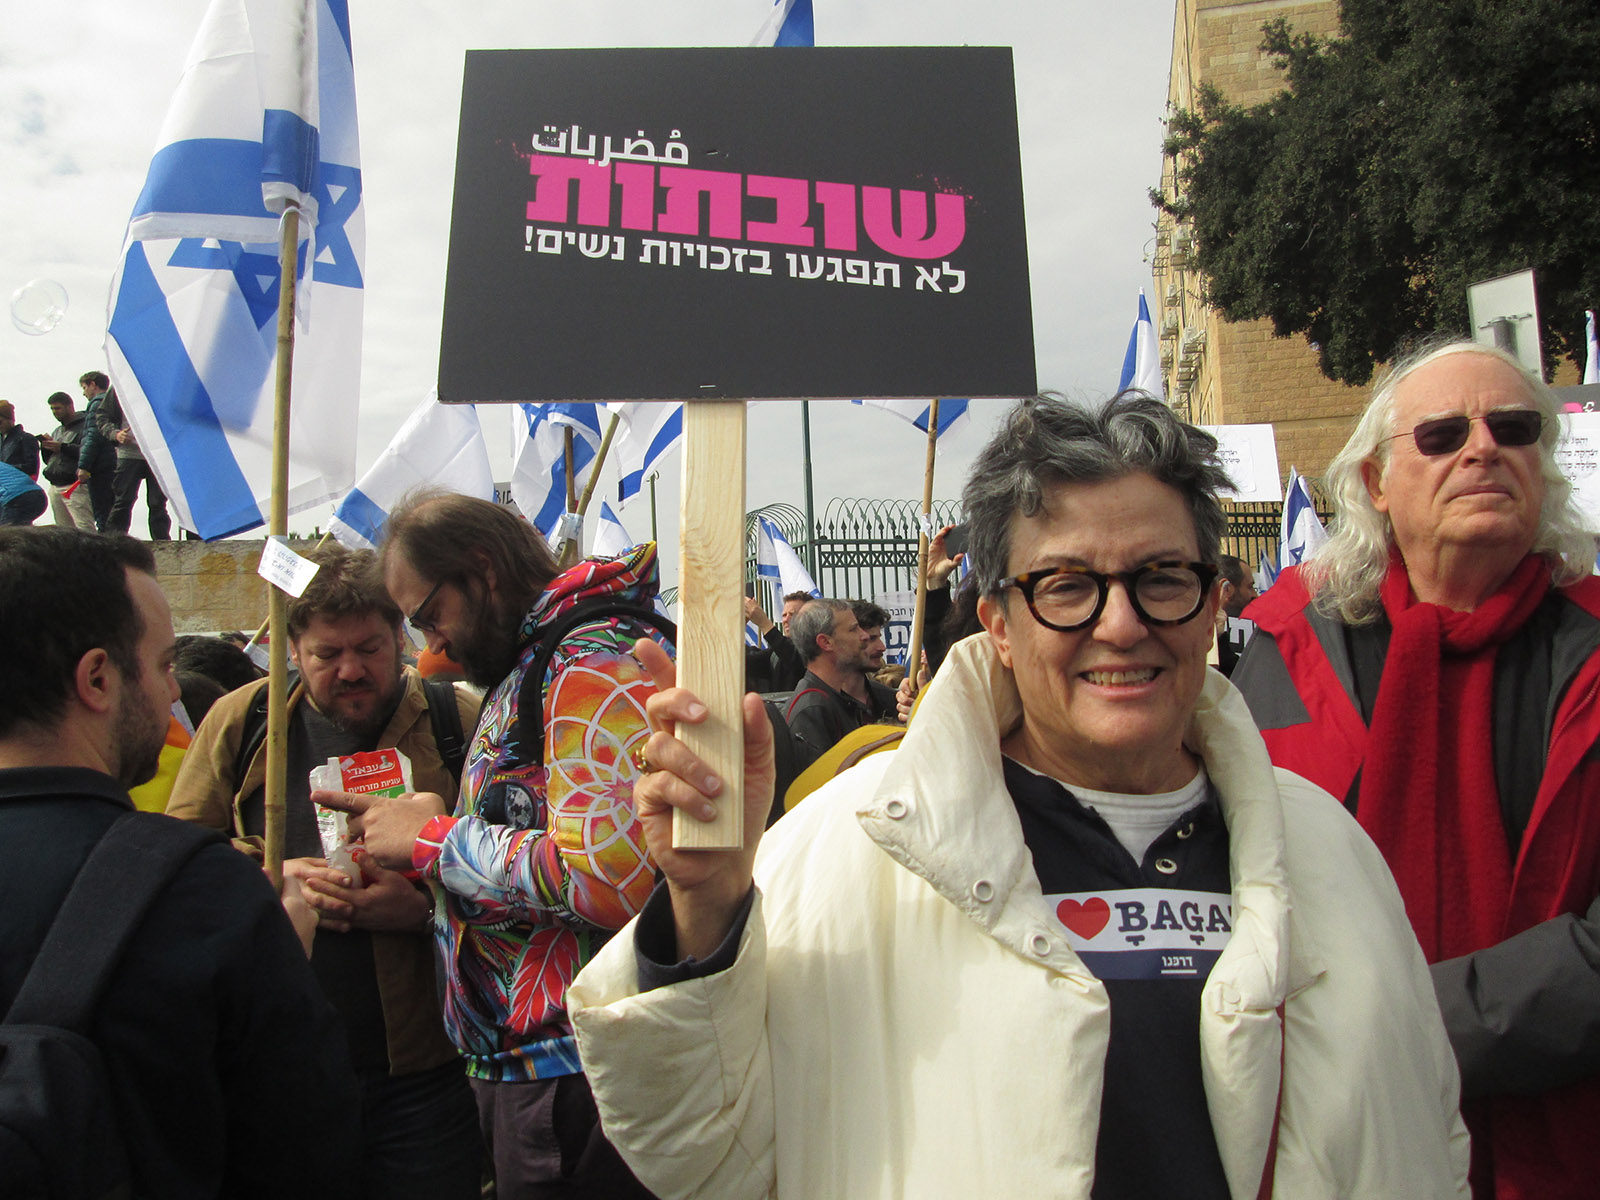 Susan Weiss, executive director of the Center for Women’s Justice, protests on Feb. 13, 2023, against proposed judicial reforms in Israel because she fears that they will weaken the courts and strengthen the reach of the Orthodox Jewish religious establishment. Photo by Michele Chabin